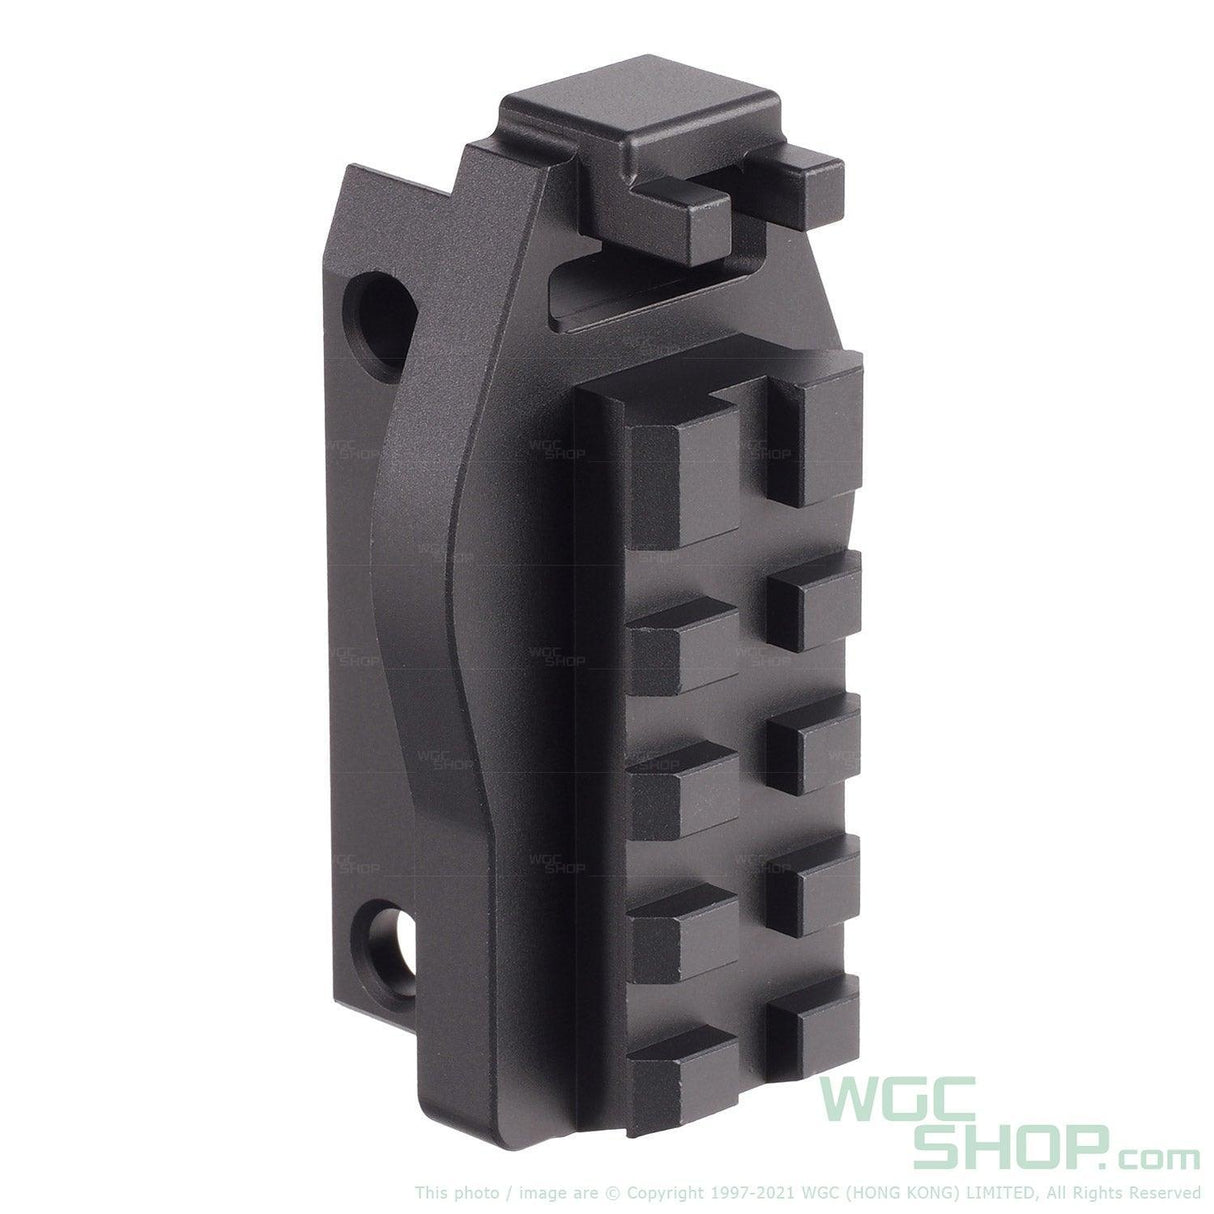 BOW MASTER Picatinny Rail Stock Adapter for VFC MP7 GBB Airsoft - WGC Shop